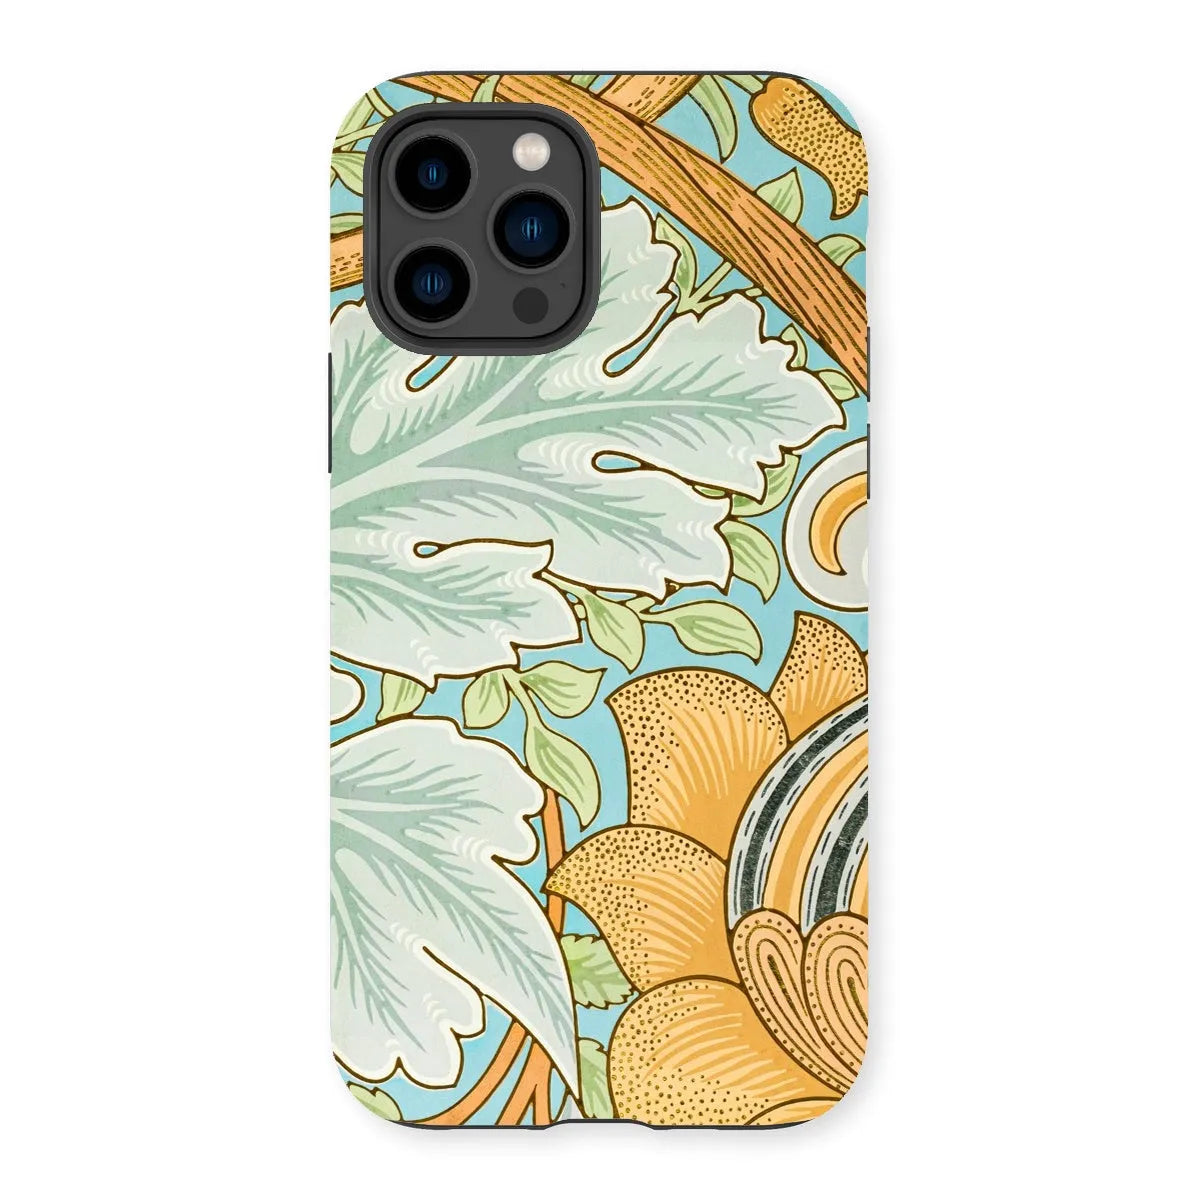 St. James - Arts And Crafts Phone Case - William Morris - Iphone 14 Pro / Matte - Mobile Phone Cases - Aesthetic Art